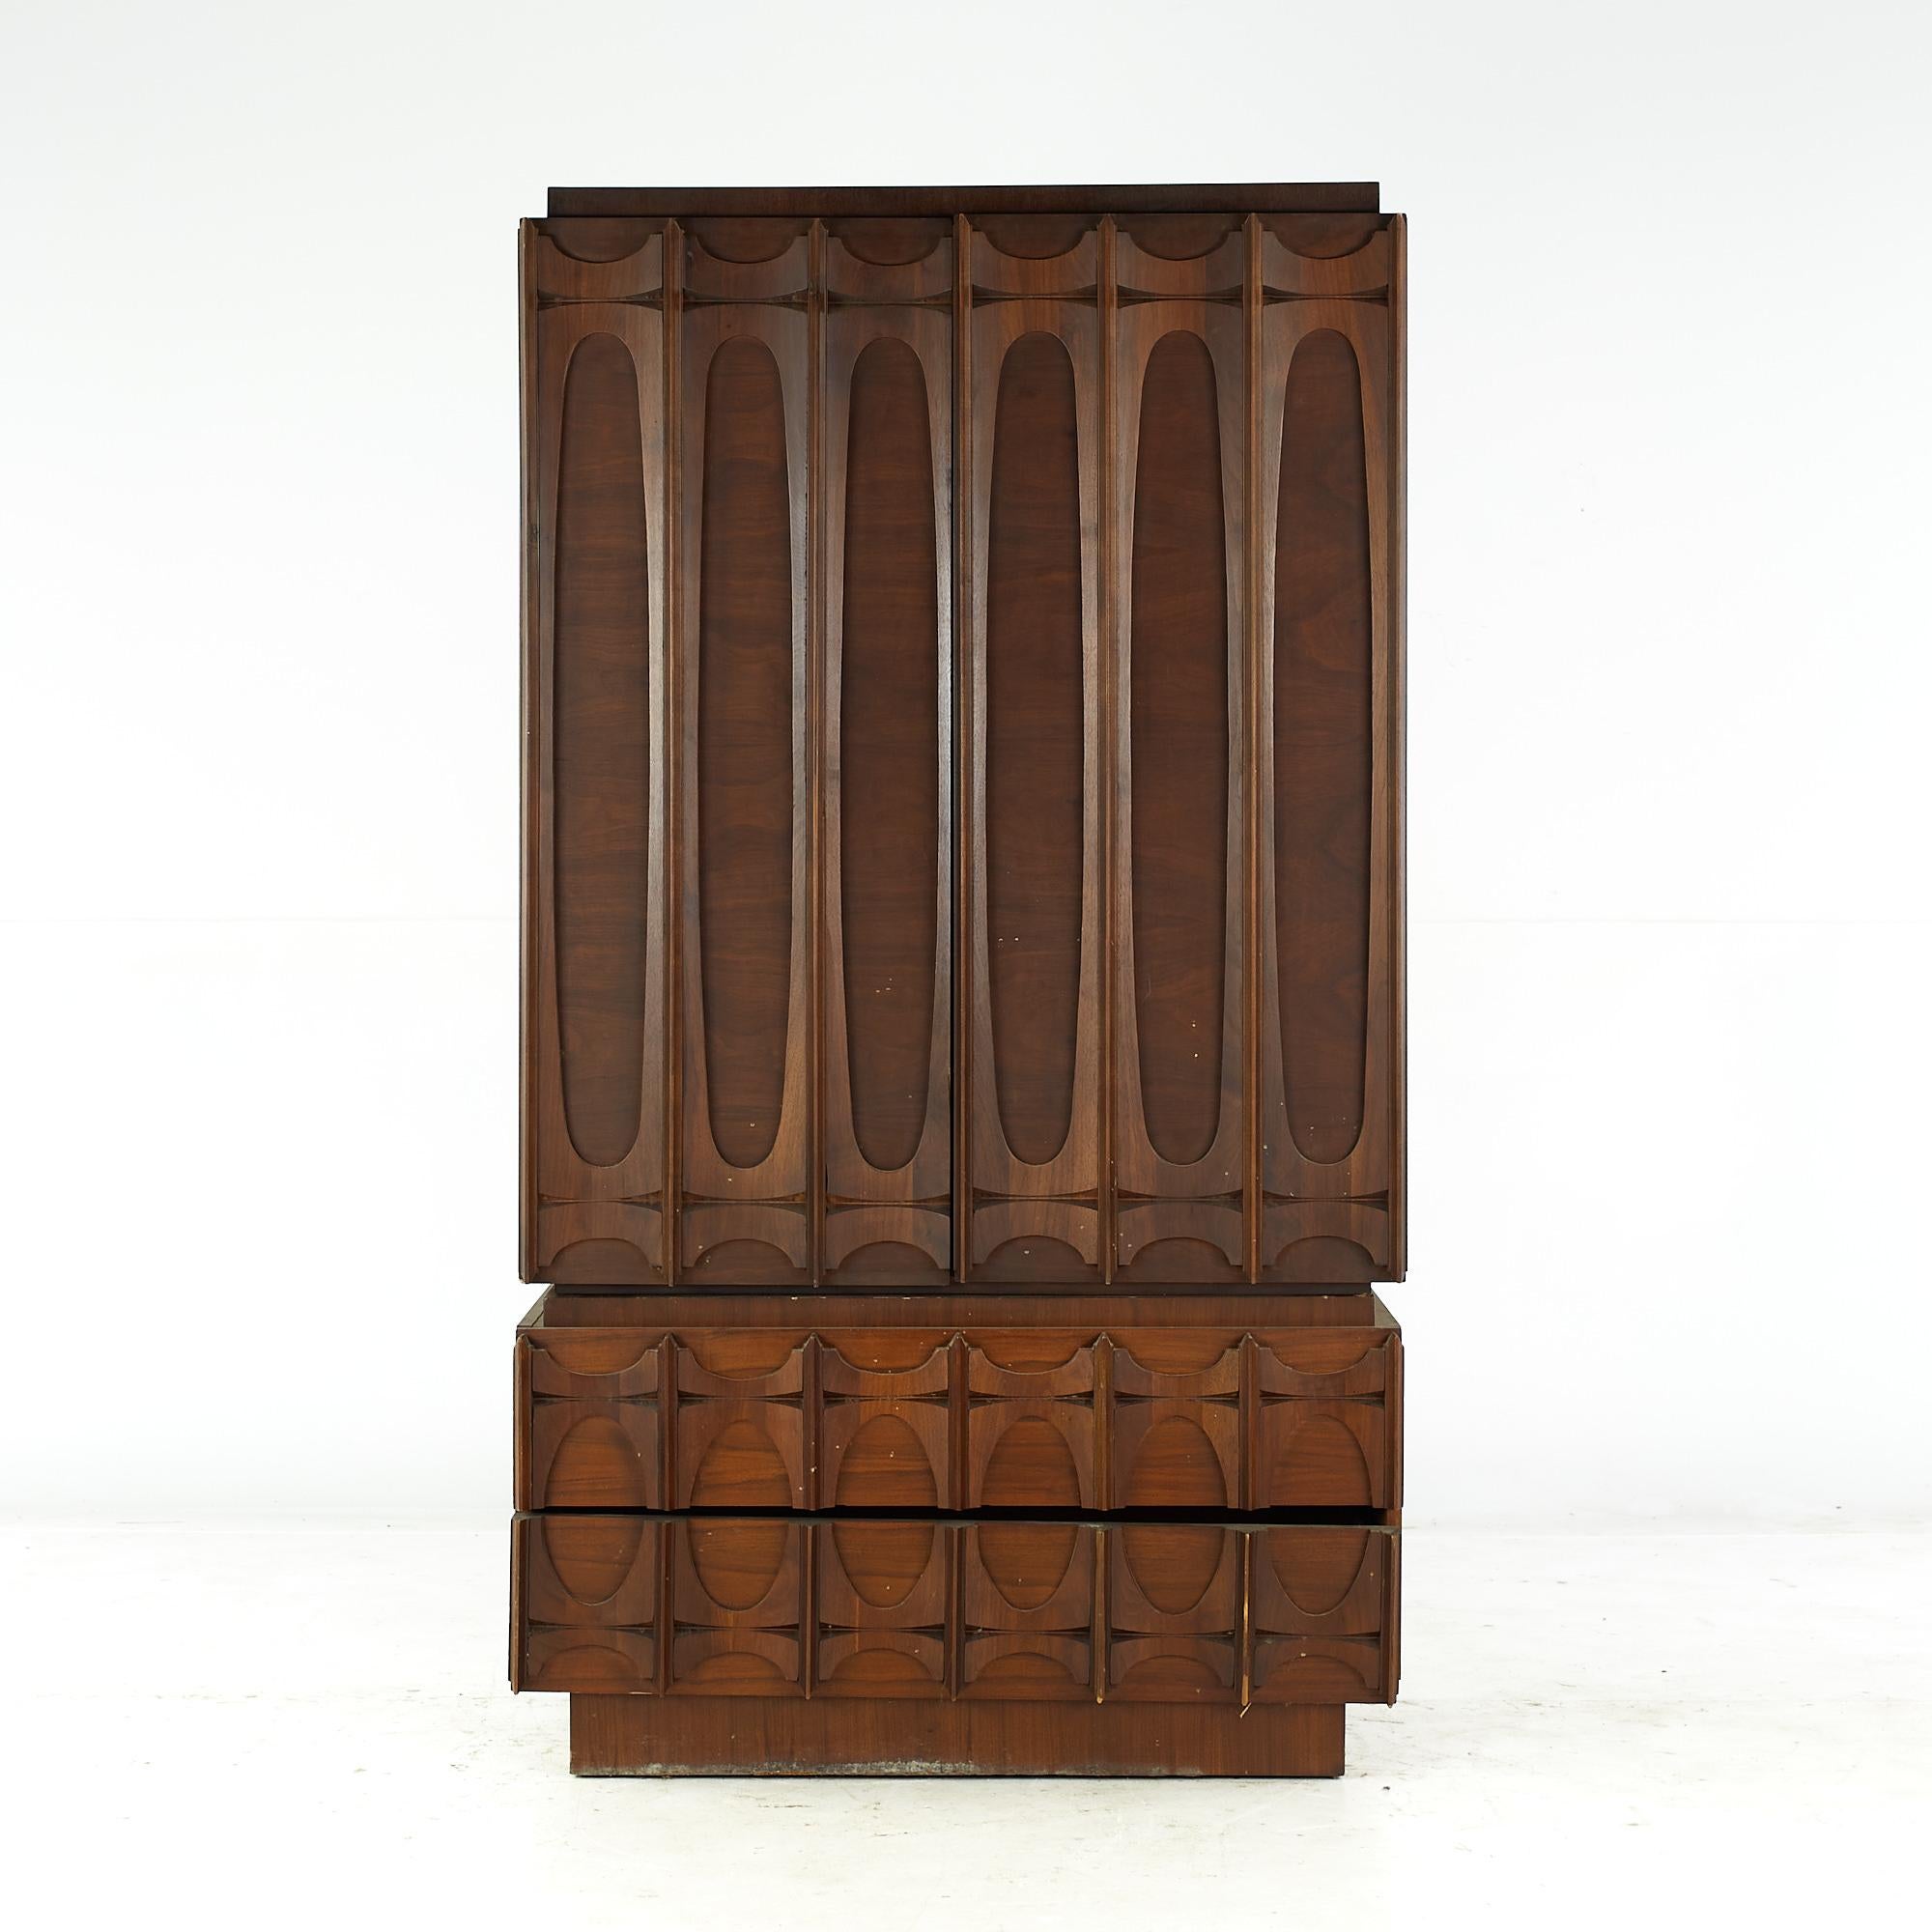 Tobago Brutalist Mid Century Walnut Armoire Highboy Dresser

This highboy measures: 40.5 wide x 21.5 deep x 72 inches high

All pieces of furniture can be had in what we call restored vintage condition. That means the piece is restored upon